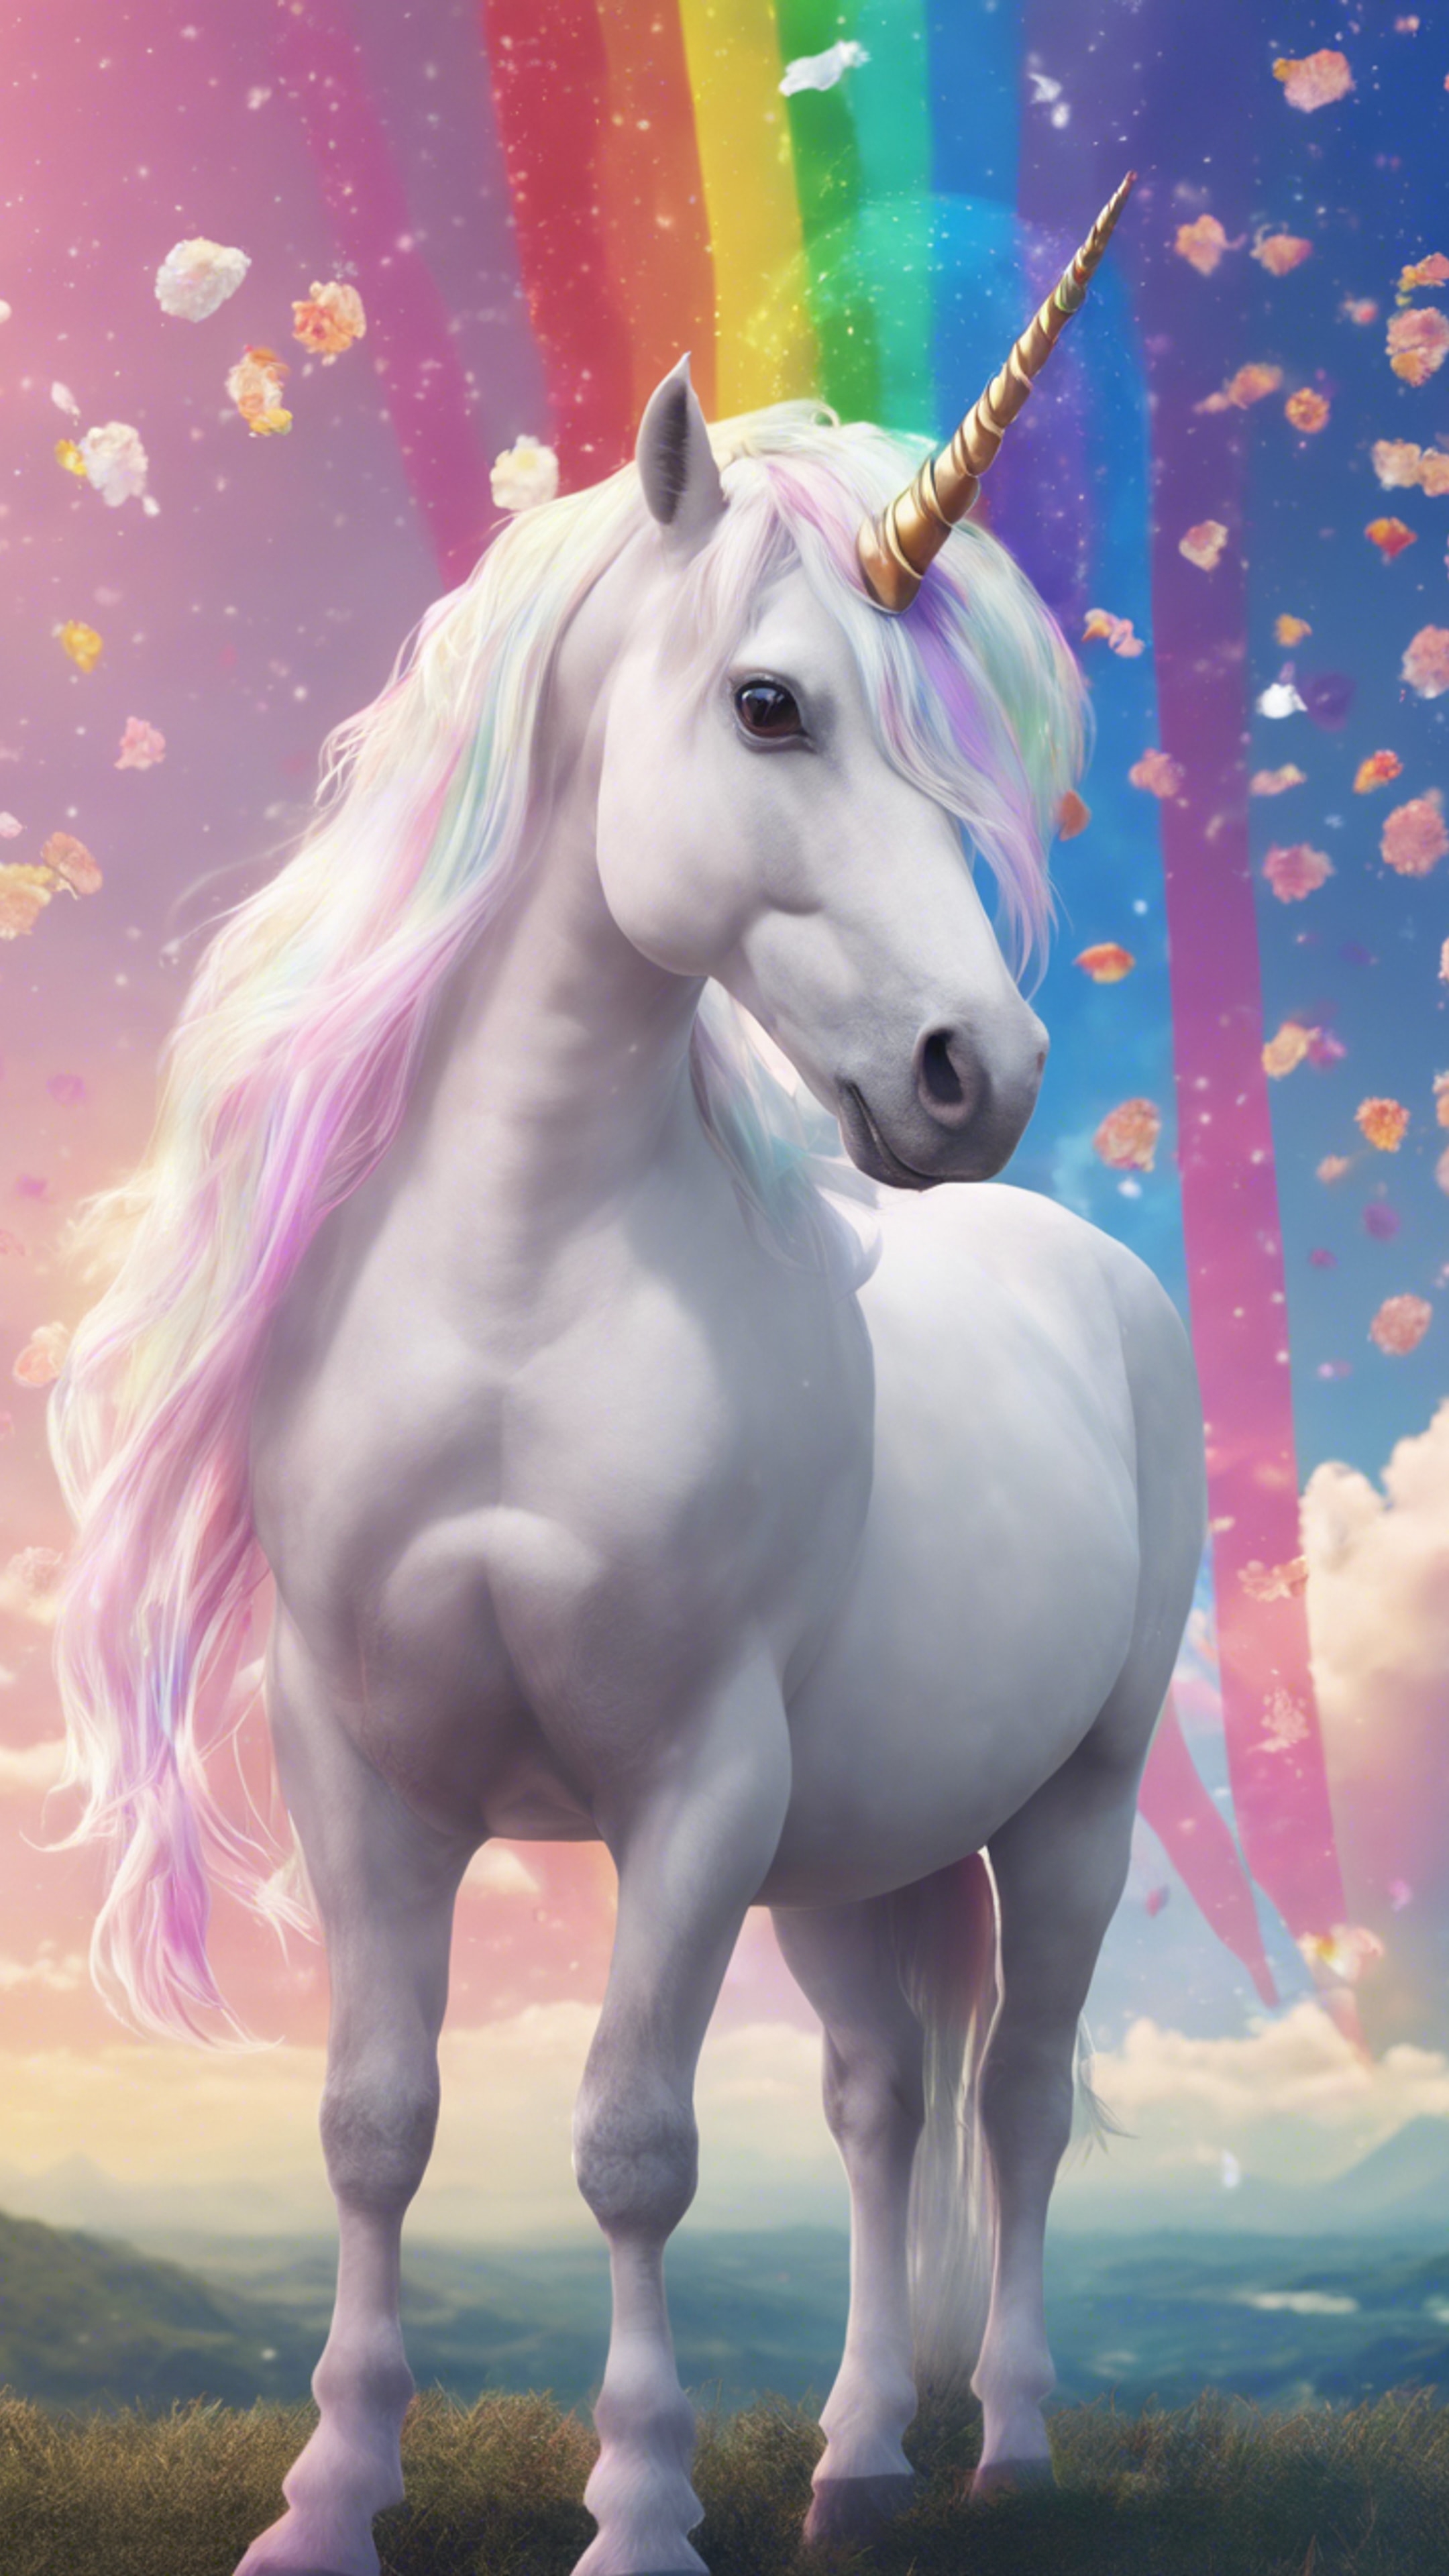 A white unicorn with rainbow-colored mane in a kawaii styled anime background. Wallpaper[3fcd035c52a54abd9a77]